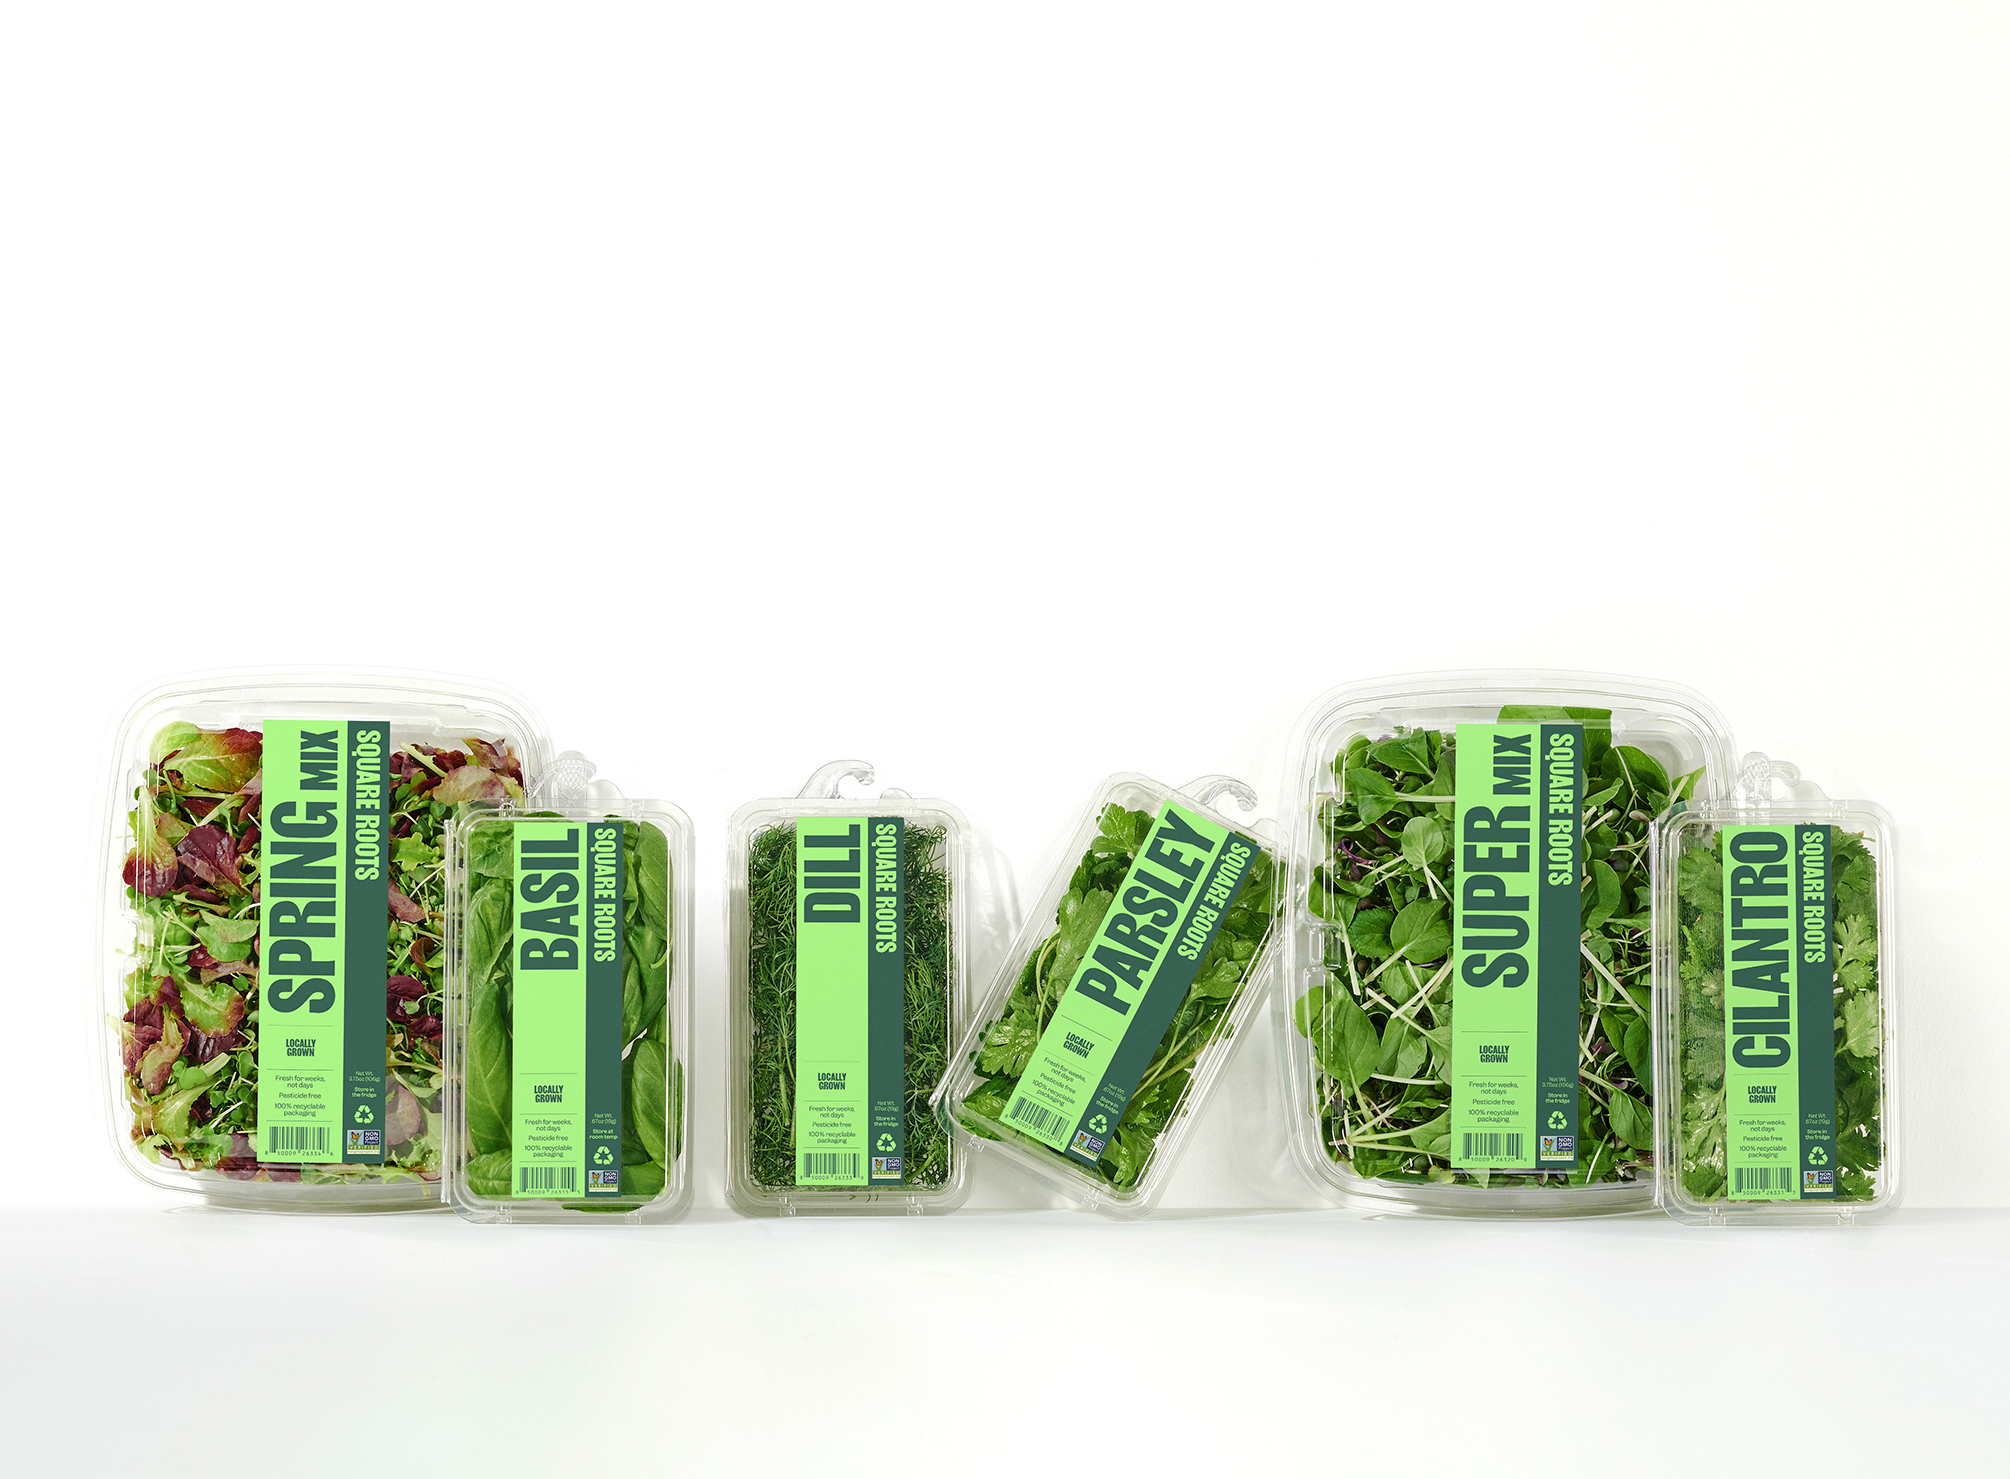 The newly designed packaging from Square Roots is featured on the company's herbs and salad mixes.